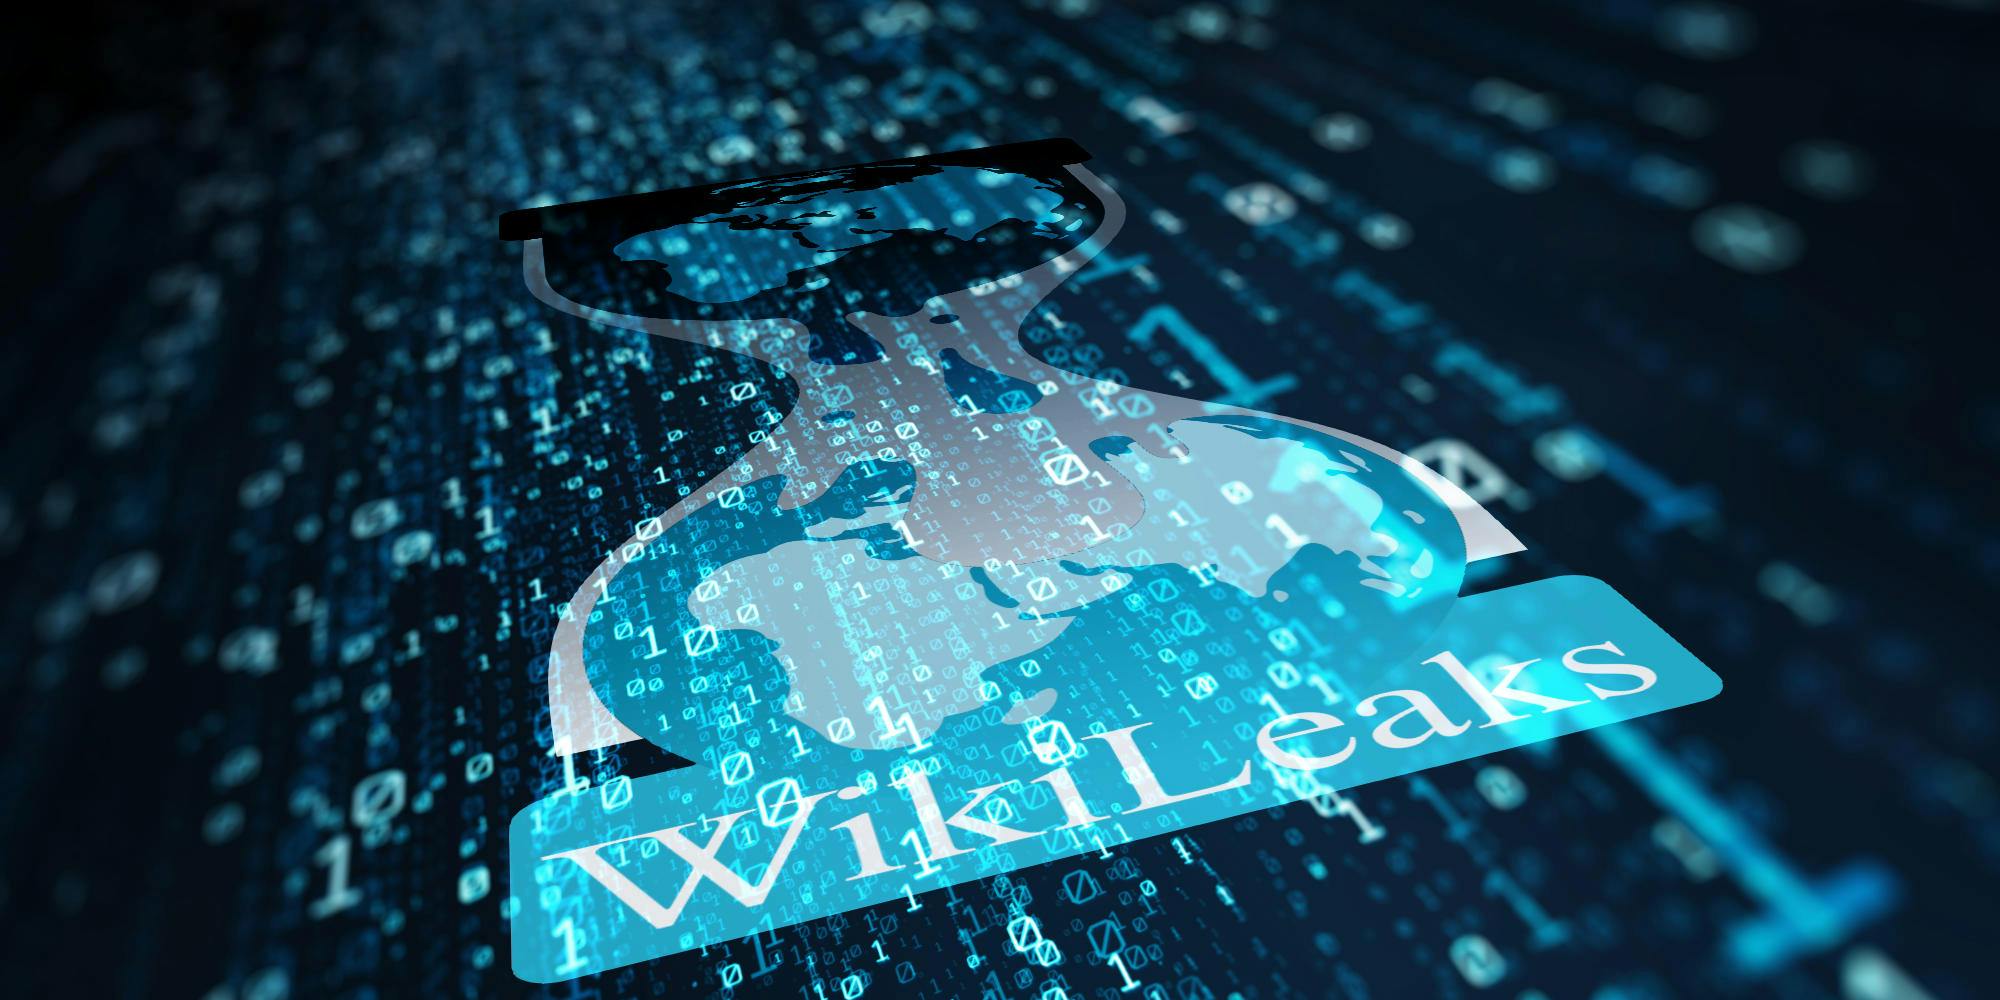 Leaking To WikiLeaks Is Nearly Impossible Amid Uptick In Hacktivism